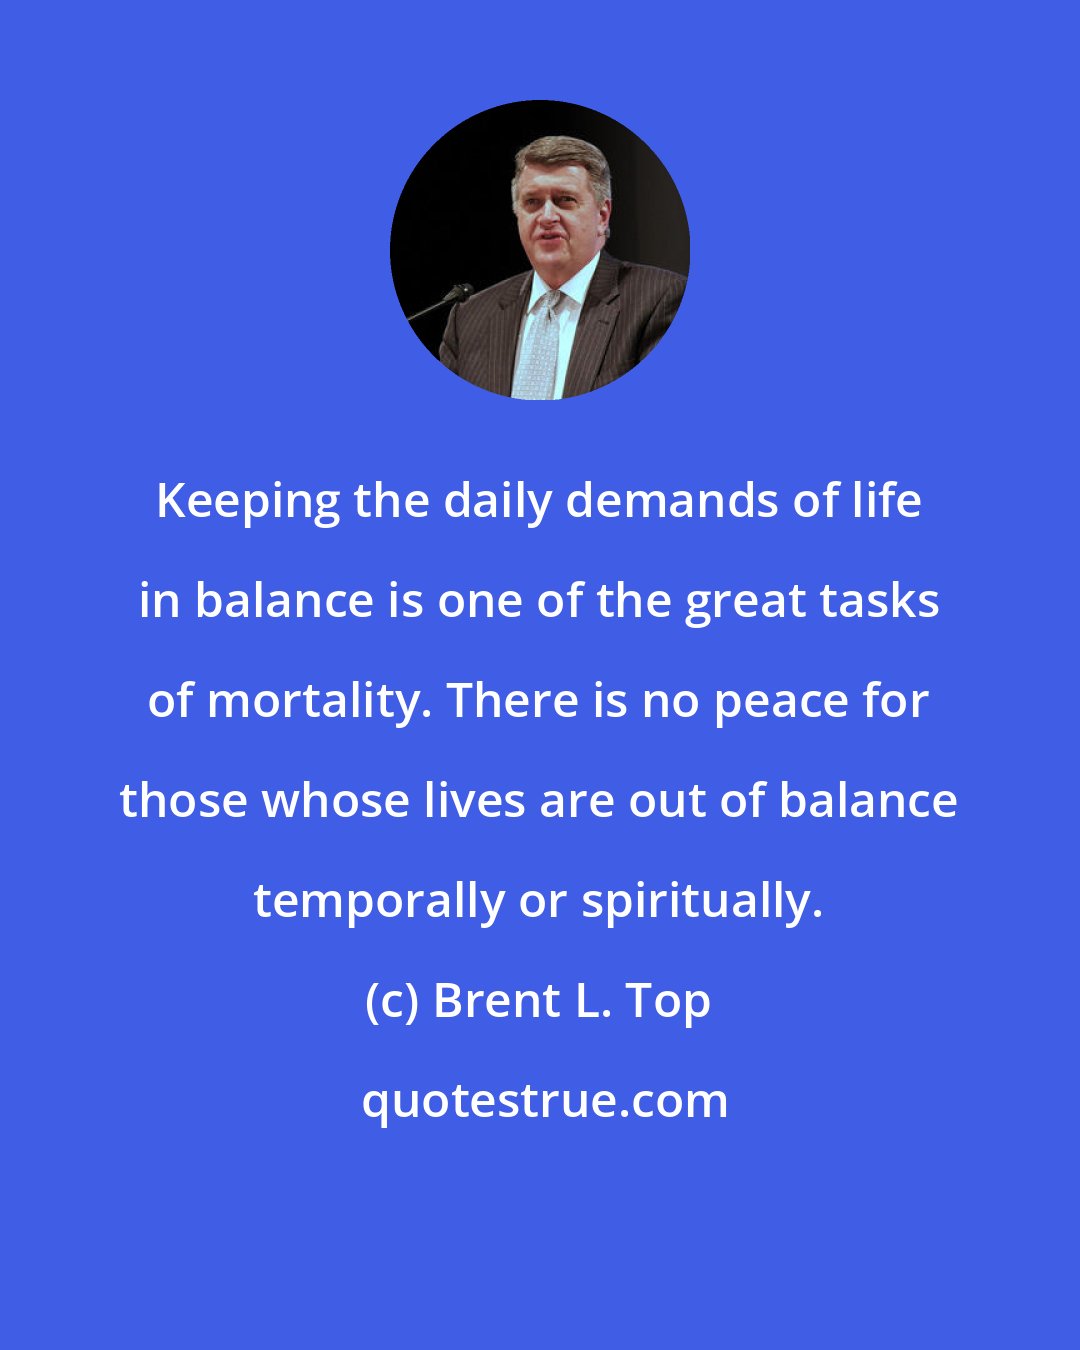 Brent L. Top: Keeping the daily demands of life in balance is one of the great tasks of mortality. There is no peace for those whose lives are out of balance temporally or spiritually.